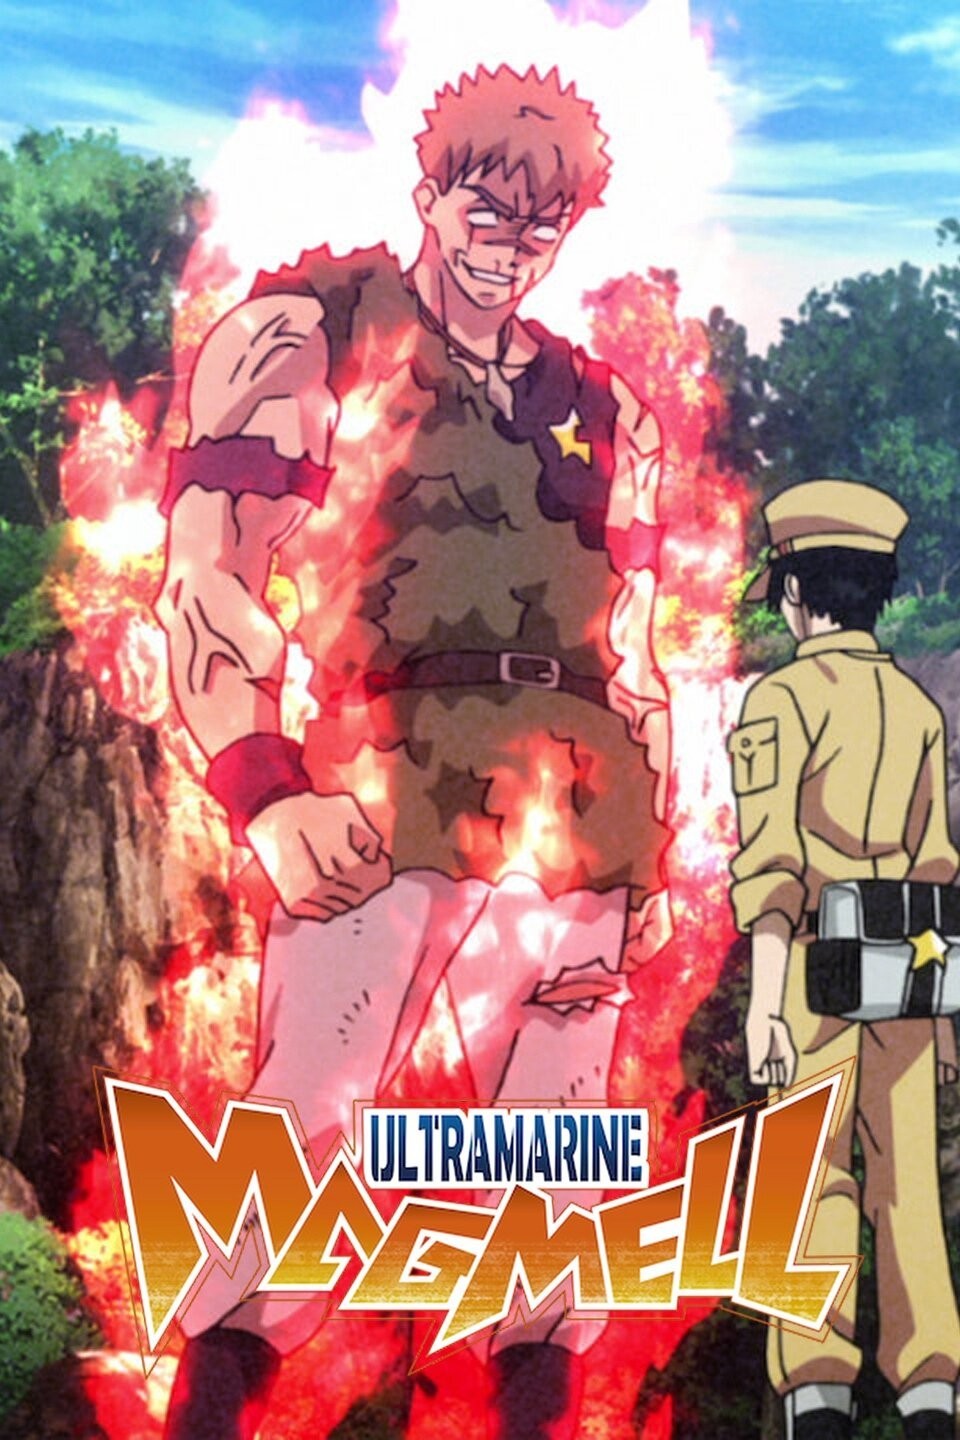 Ultramarine Magmell is now available on Netflix : r/anime